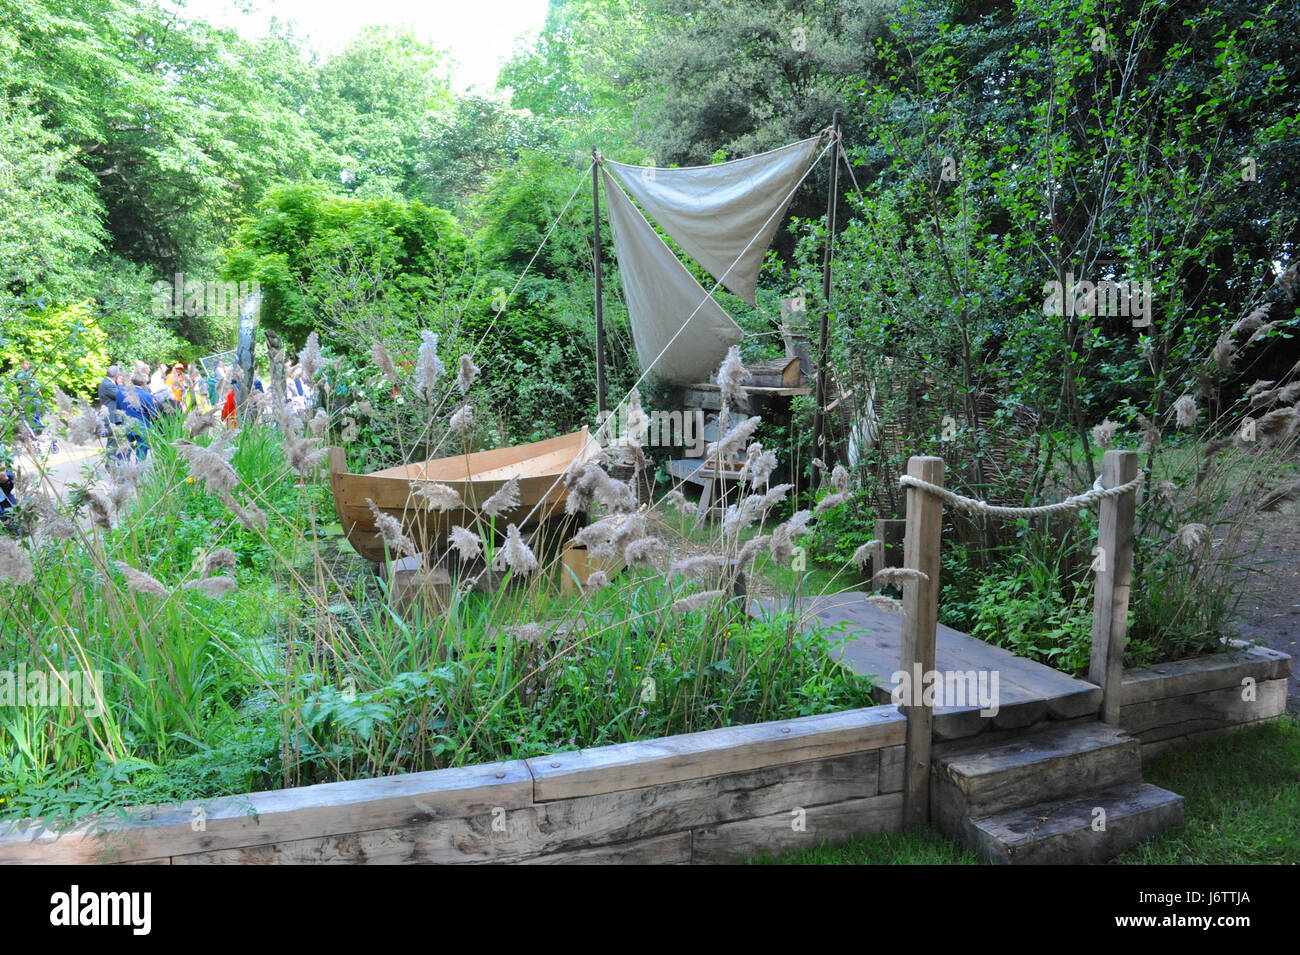 London, UK. 22nd May, 2017. The Broadland Boatbuilder's Garden (designed by Gary Breeze), one of the nine beautiful and elegant Artisan gardens on display at the 2017 RHS Chelsea Flower Show which opened today, London, UK.  Artisan gardens revitalise traditional designs, materials and methods with new approaches to craft and craftsmanship. Representing some of the most imaginative and inspiring designs, these smaller gardens put a modern twist on timeless rustic ideas. Credit: Michael Preston/Alamy Live News Stock Photo